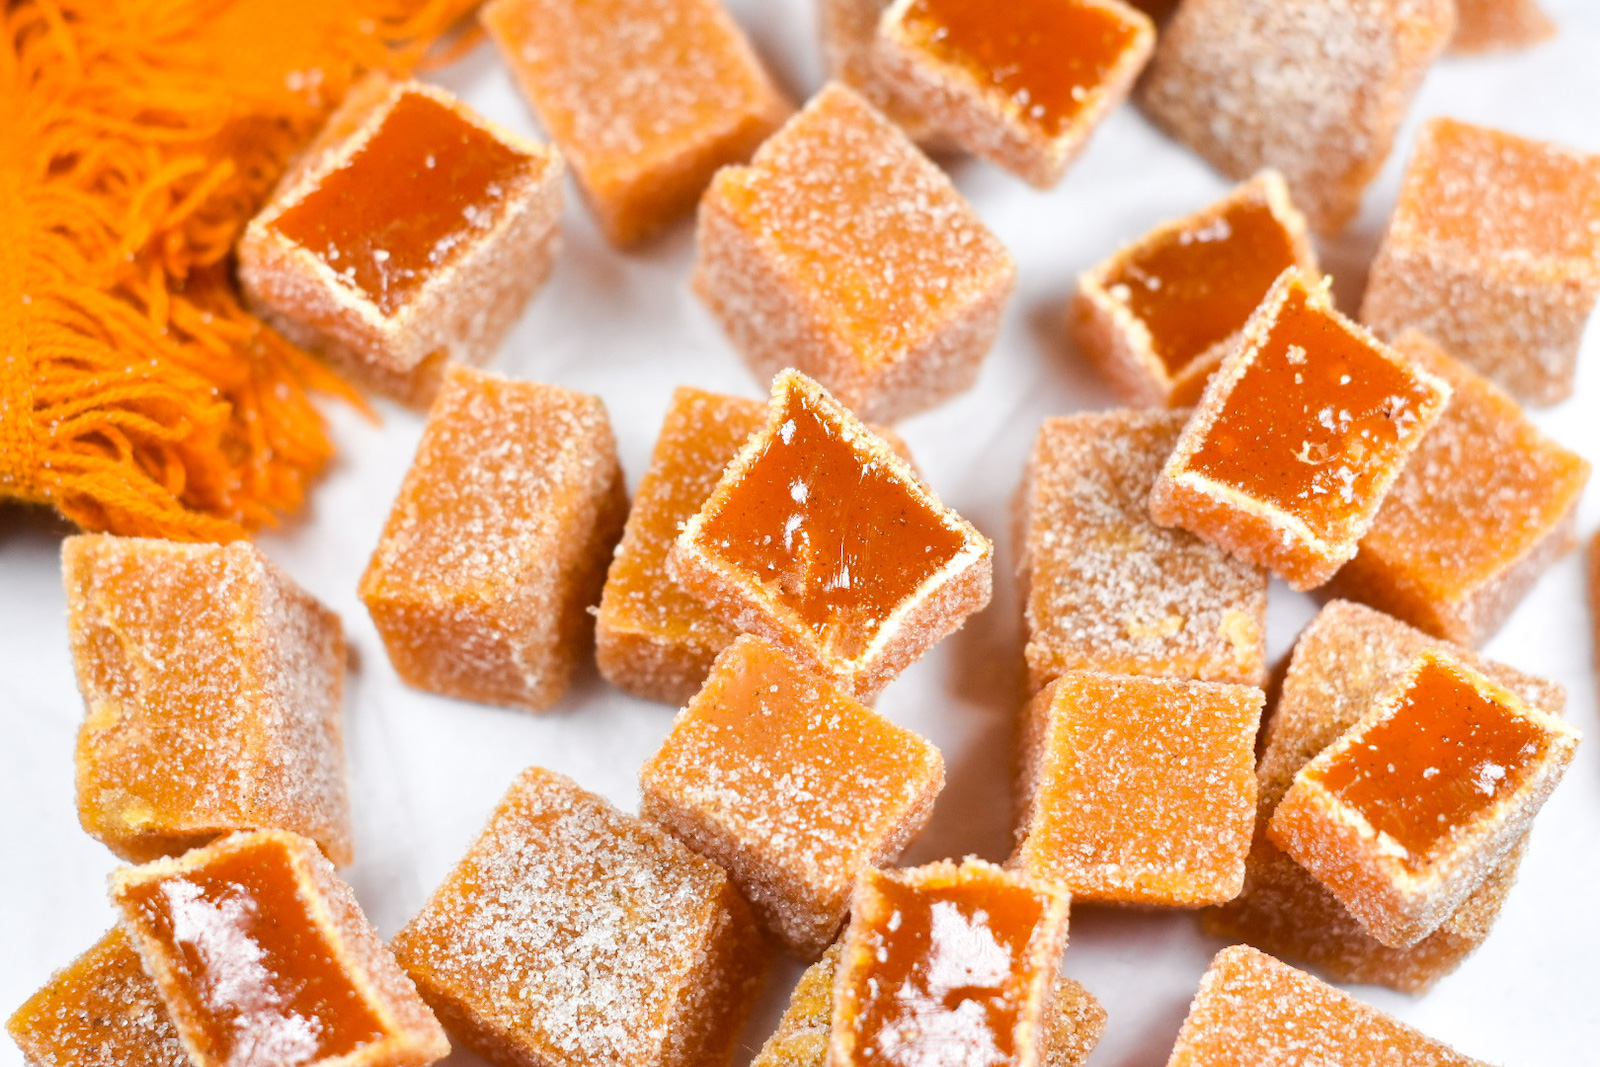 carrot ginger candies arranged on a white surface